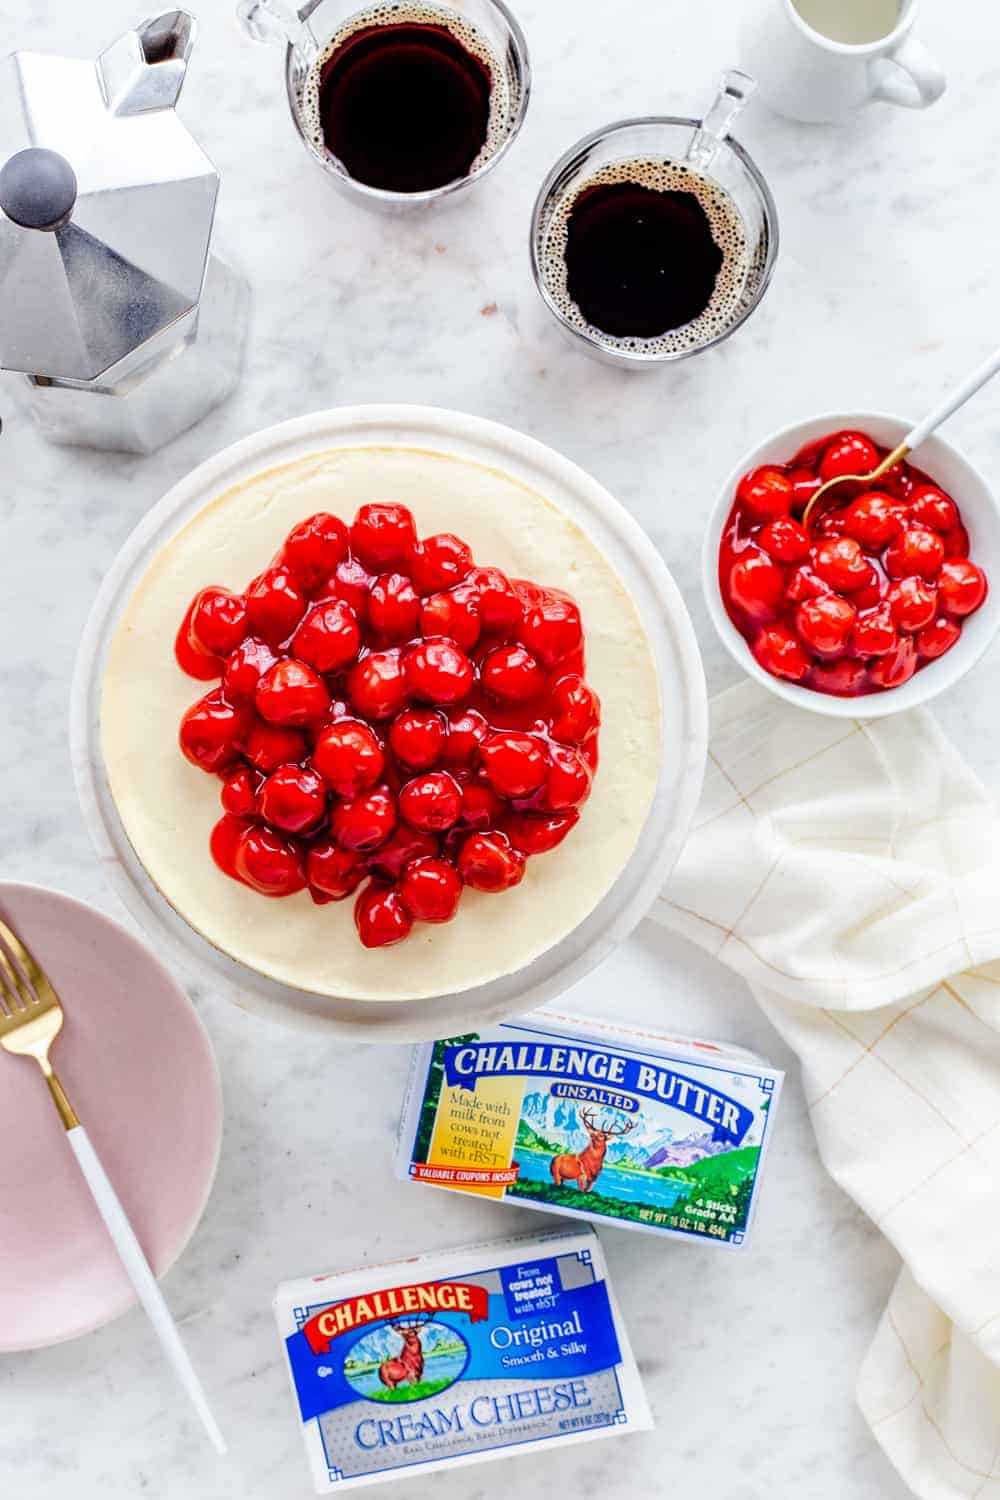 Instant Pot Cheesecake couldn't be easier. It's the perfect dessert to make in your electric pressure cooker!